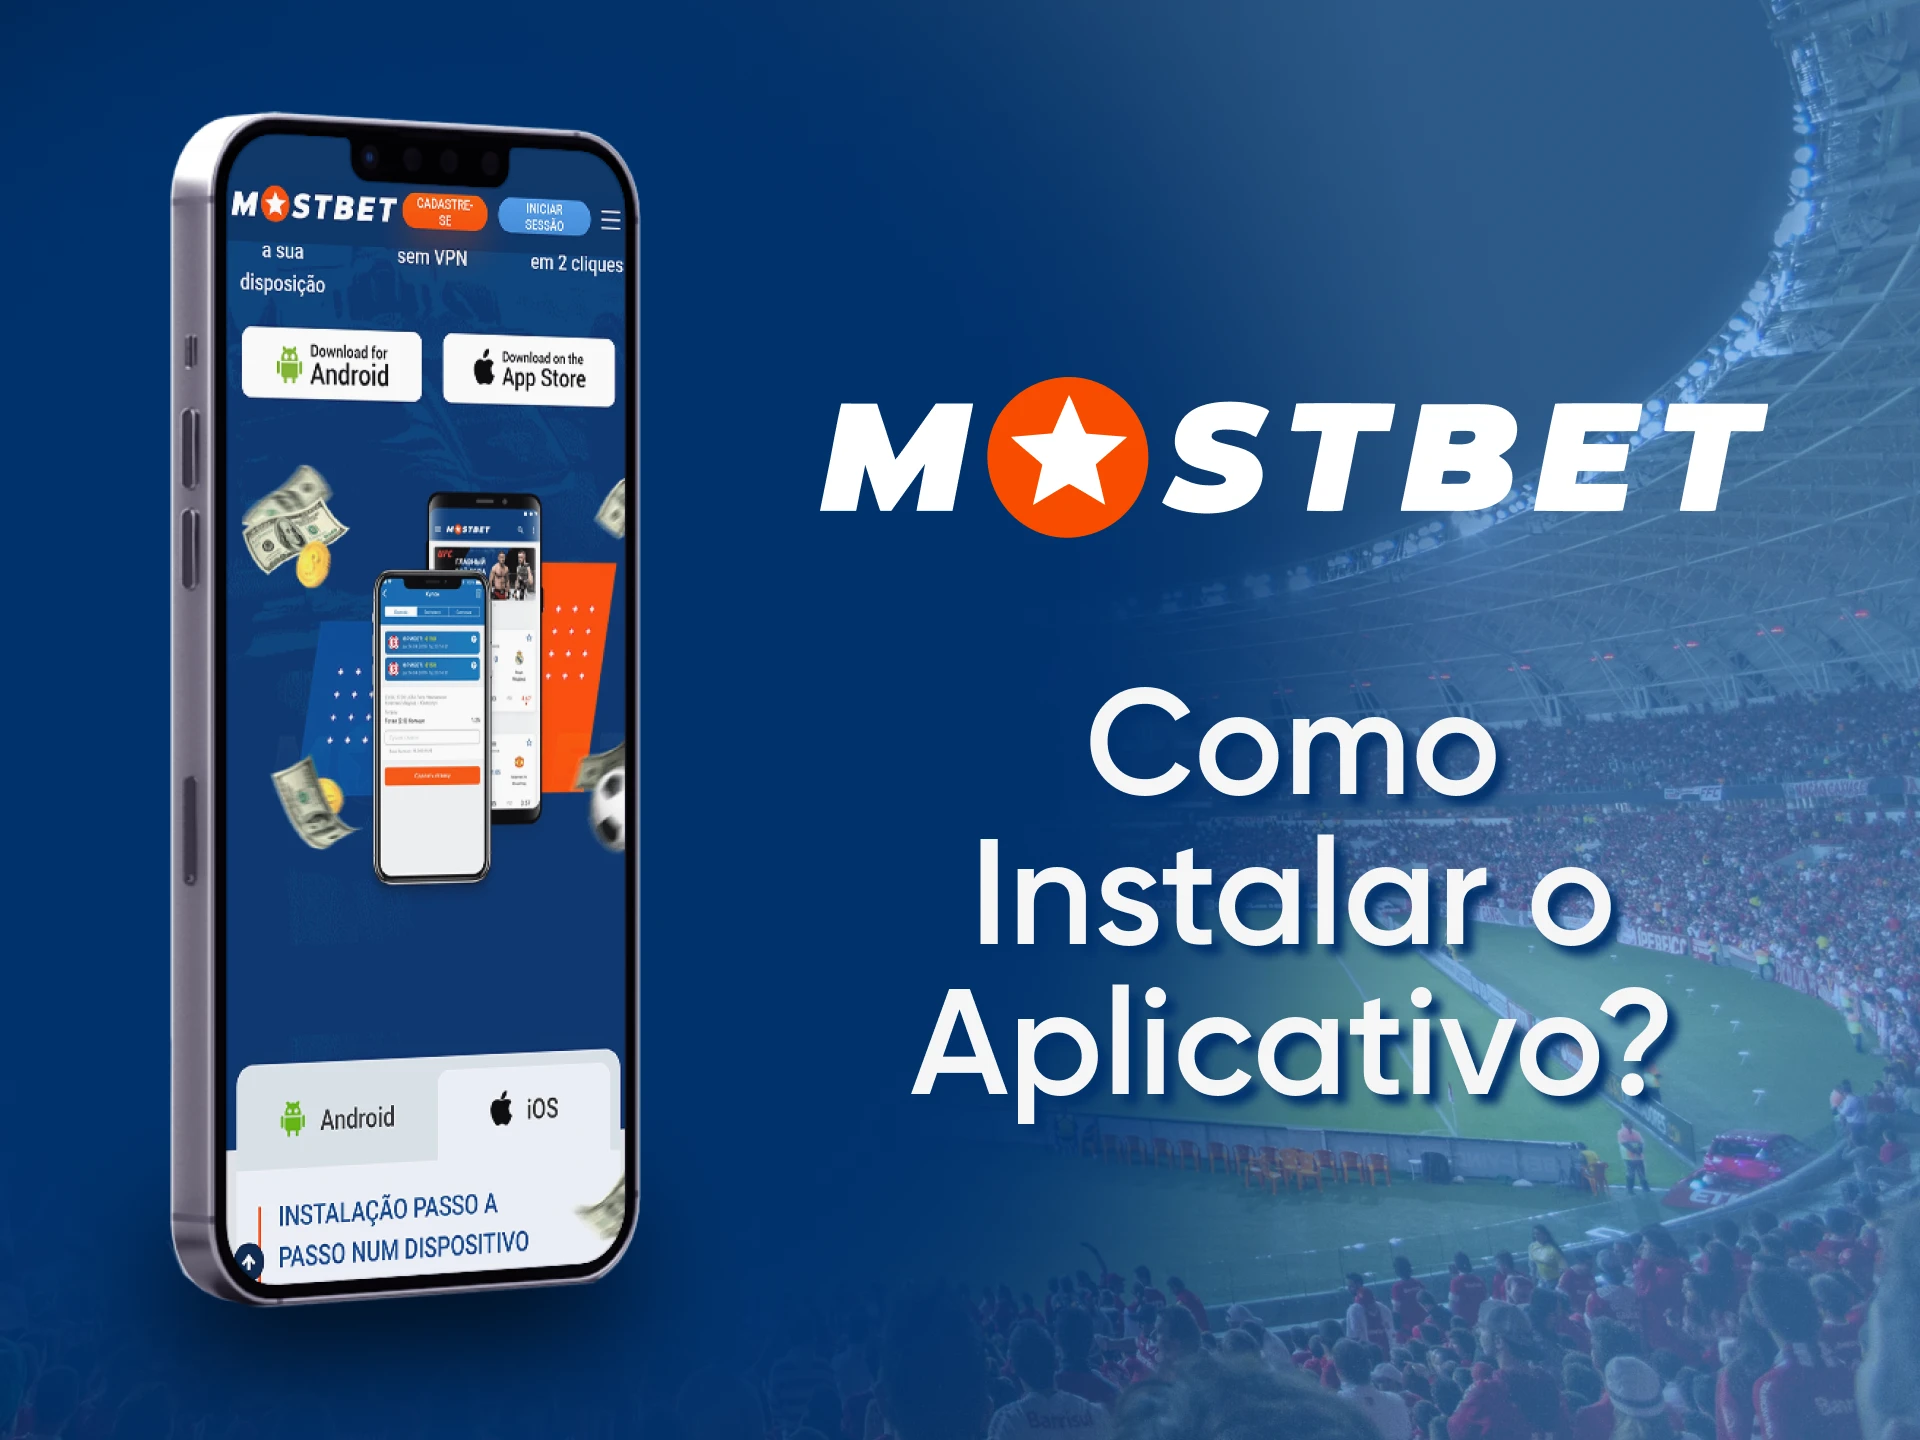 Use this guide to download and install the Mostbet app for your device.